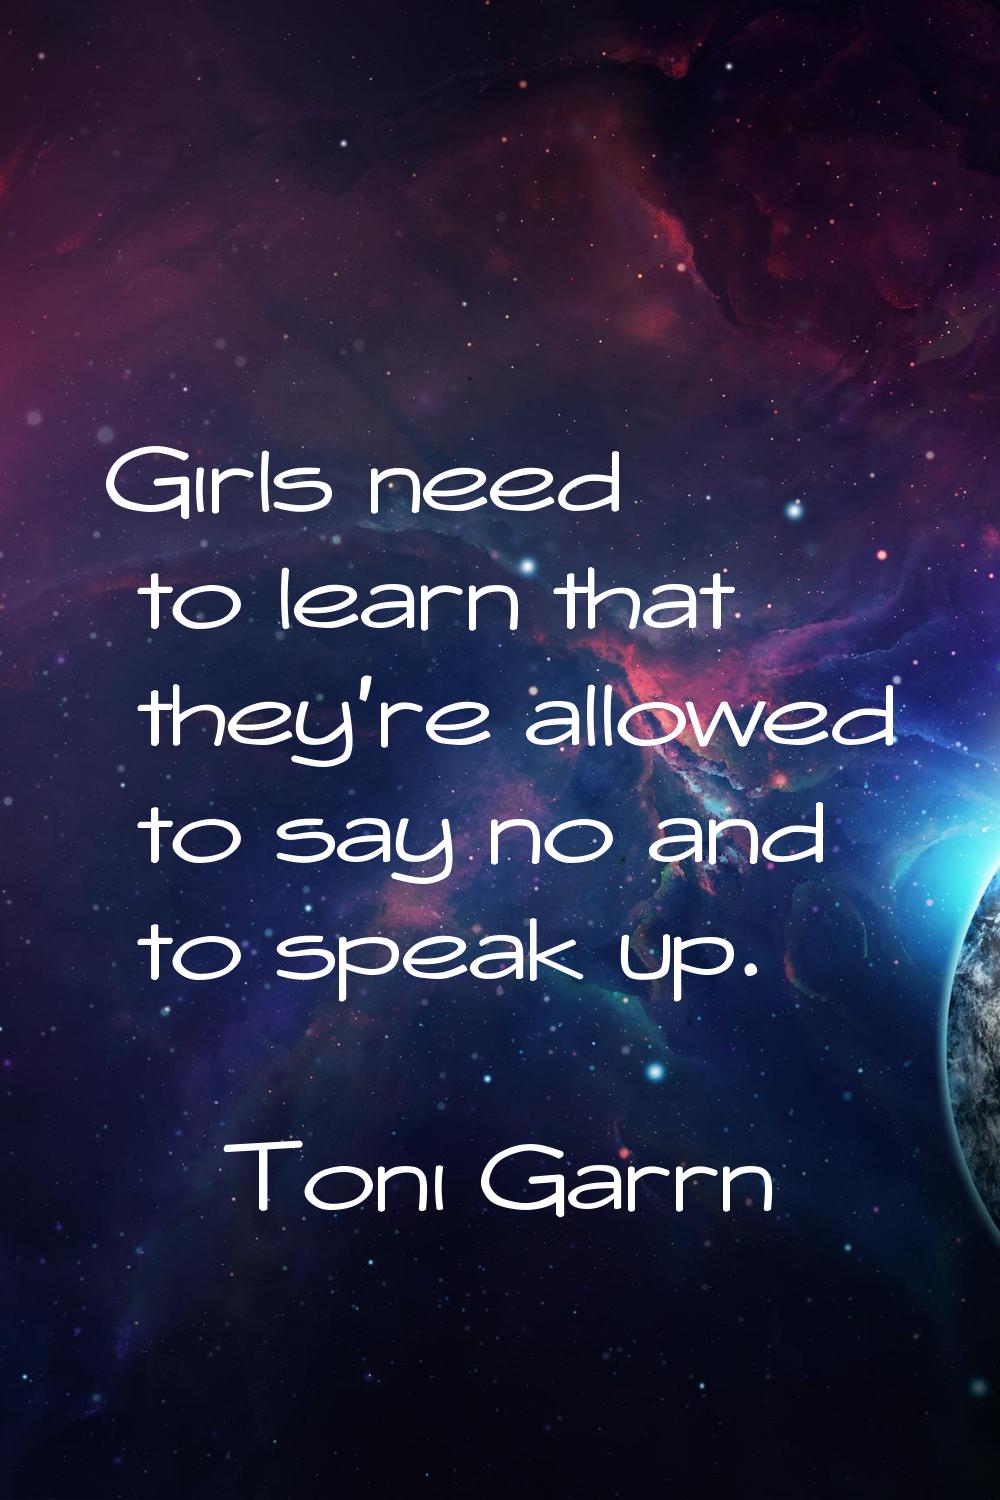 Girls need to learn that they're allowed to say no and to speak up.